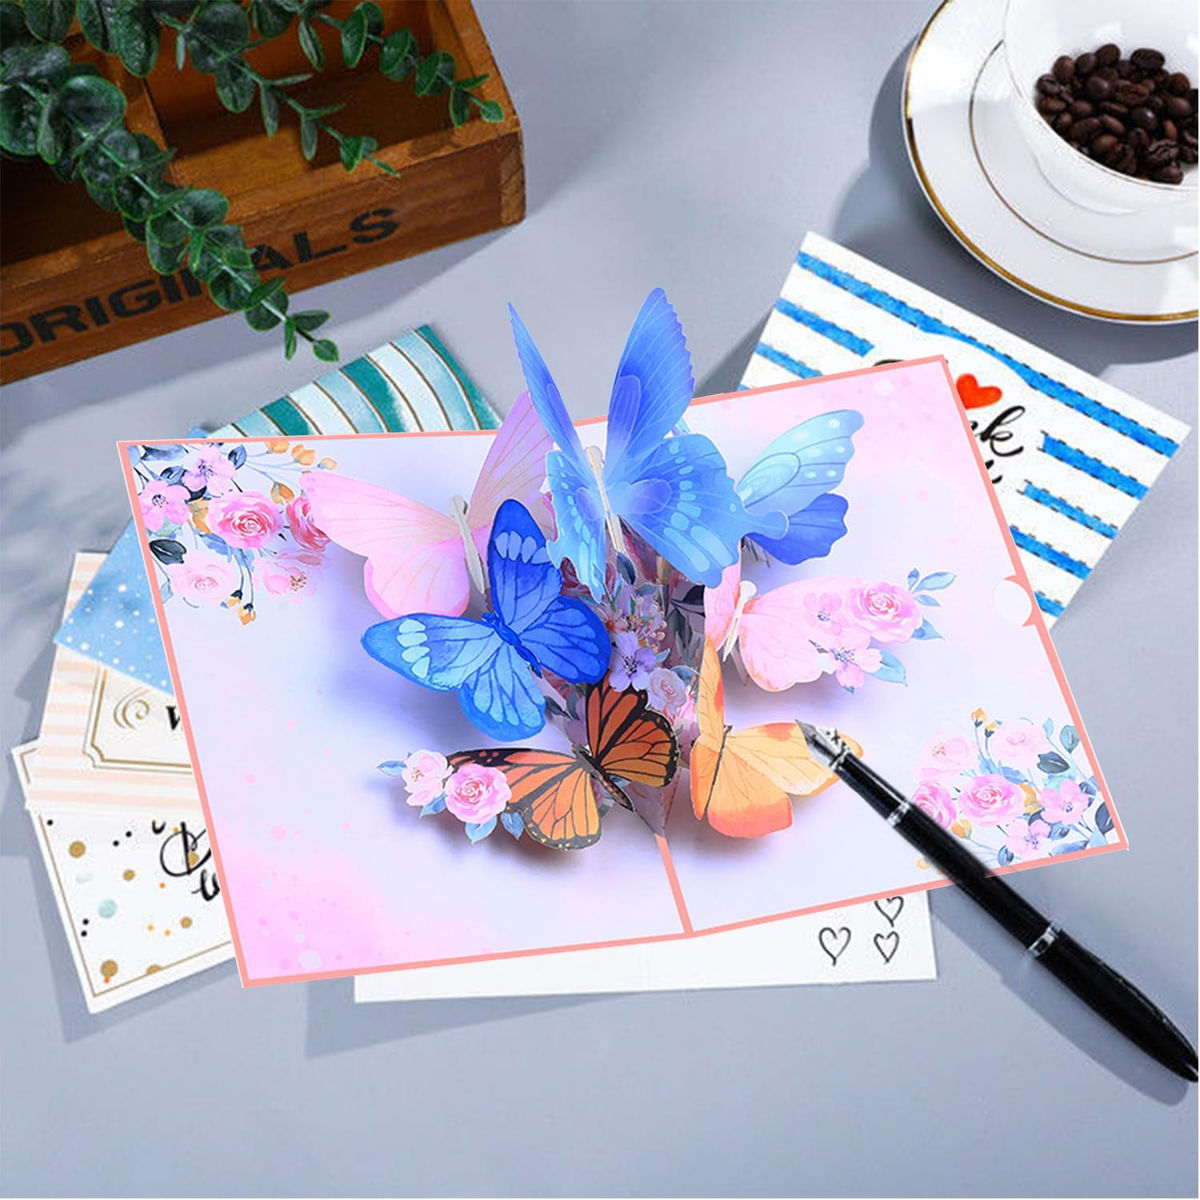 Pop Up Card, Butterfly and Flower 3D Greeting Card with Envelope for Any Occasion, Birthday, Mother's Day, Anniversary, Valentines Day, Handmade Gifts, Foldable Celebration Cards for Friends